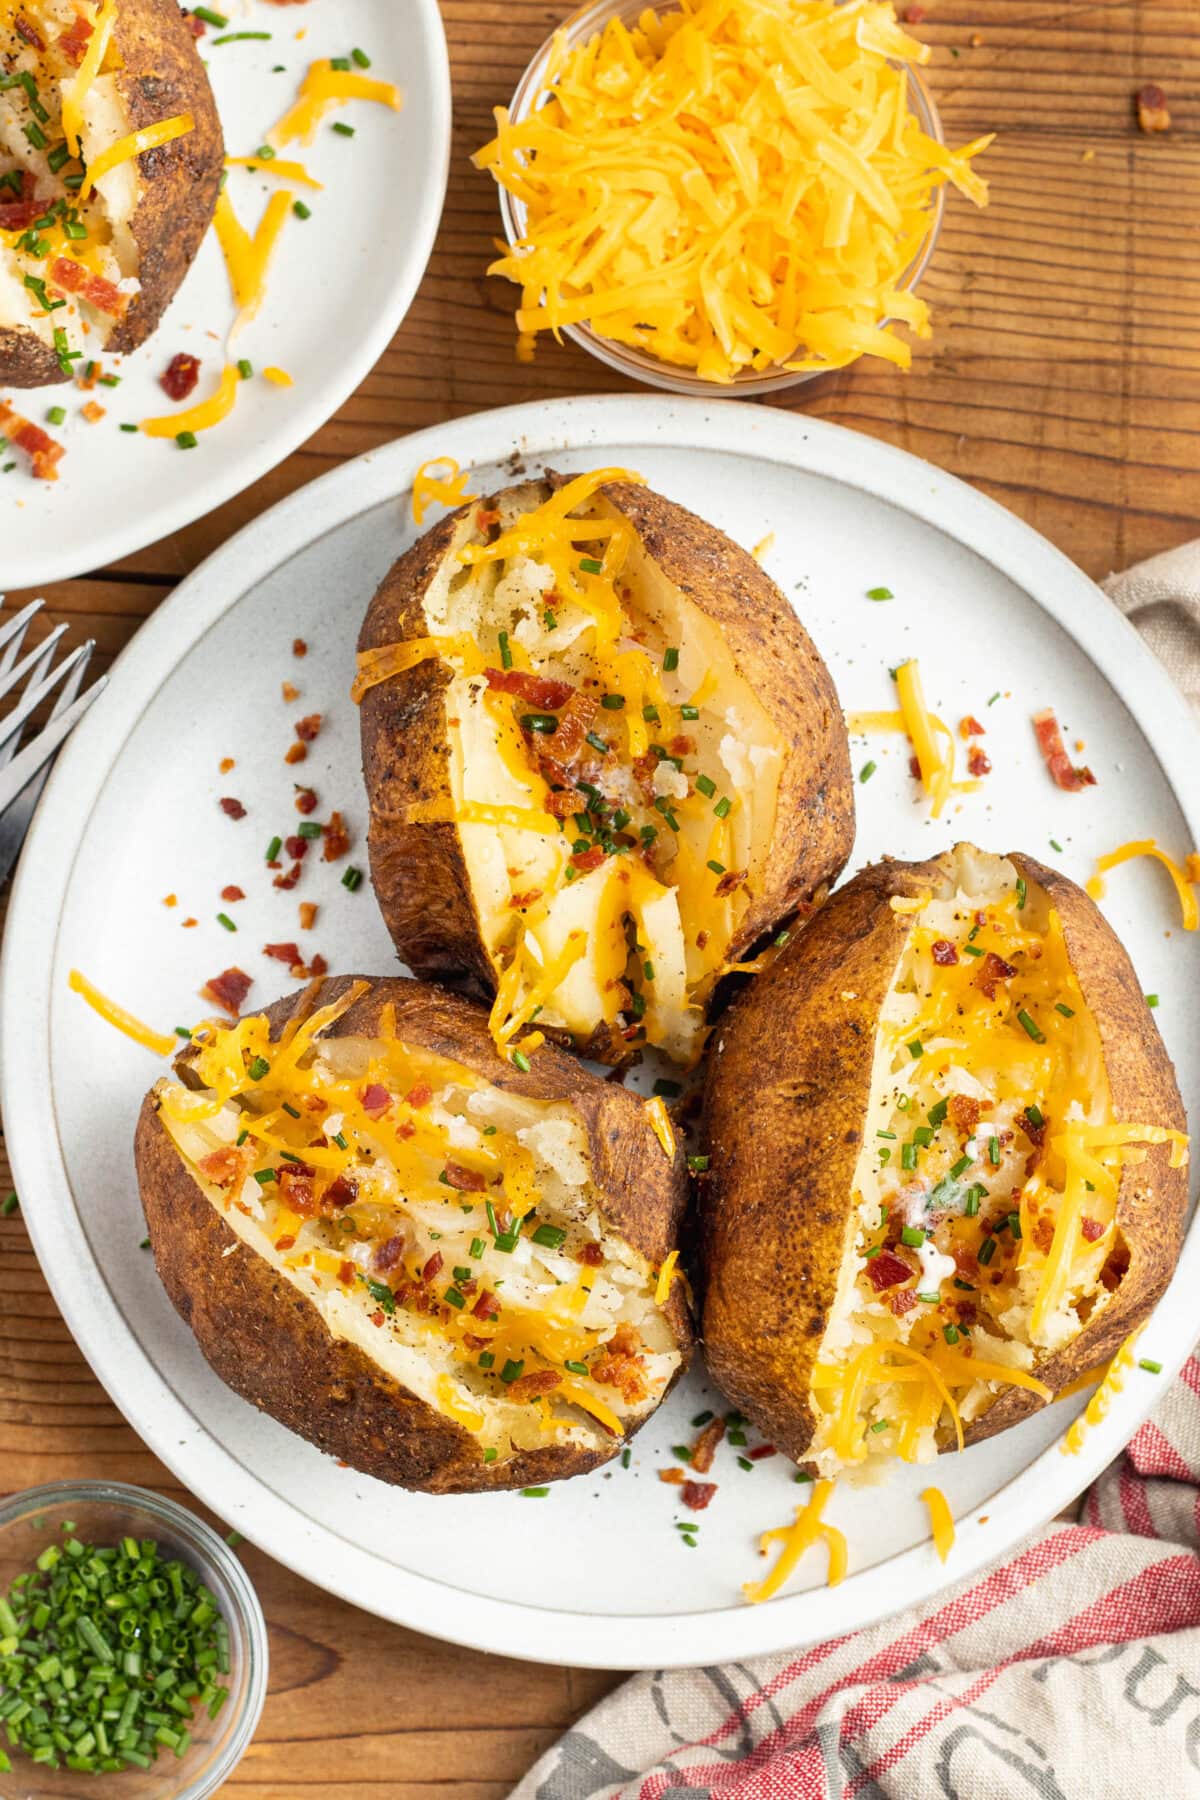 Three smoked baked potatoes sliced open and topped with cheese and bacon, arranged on a white plate.